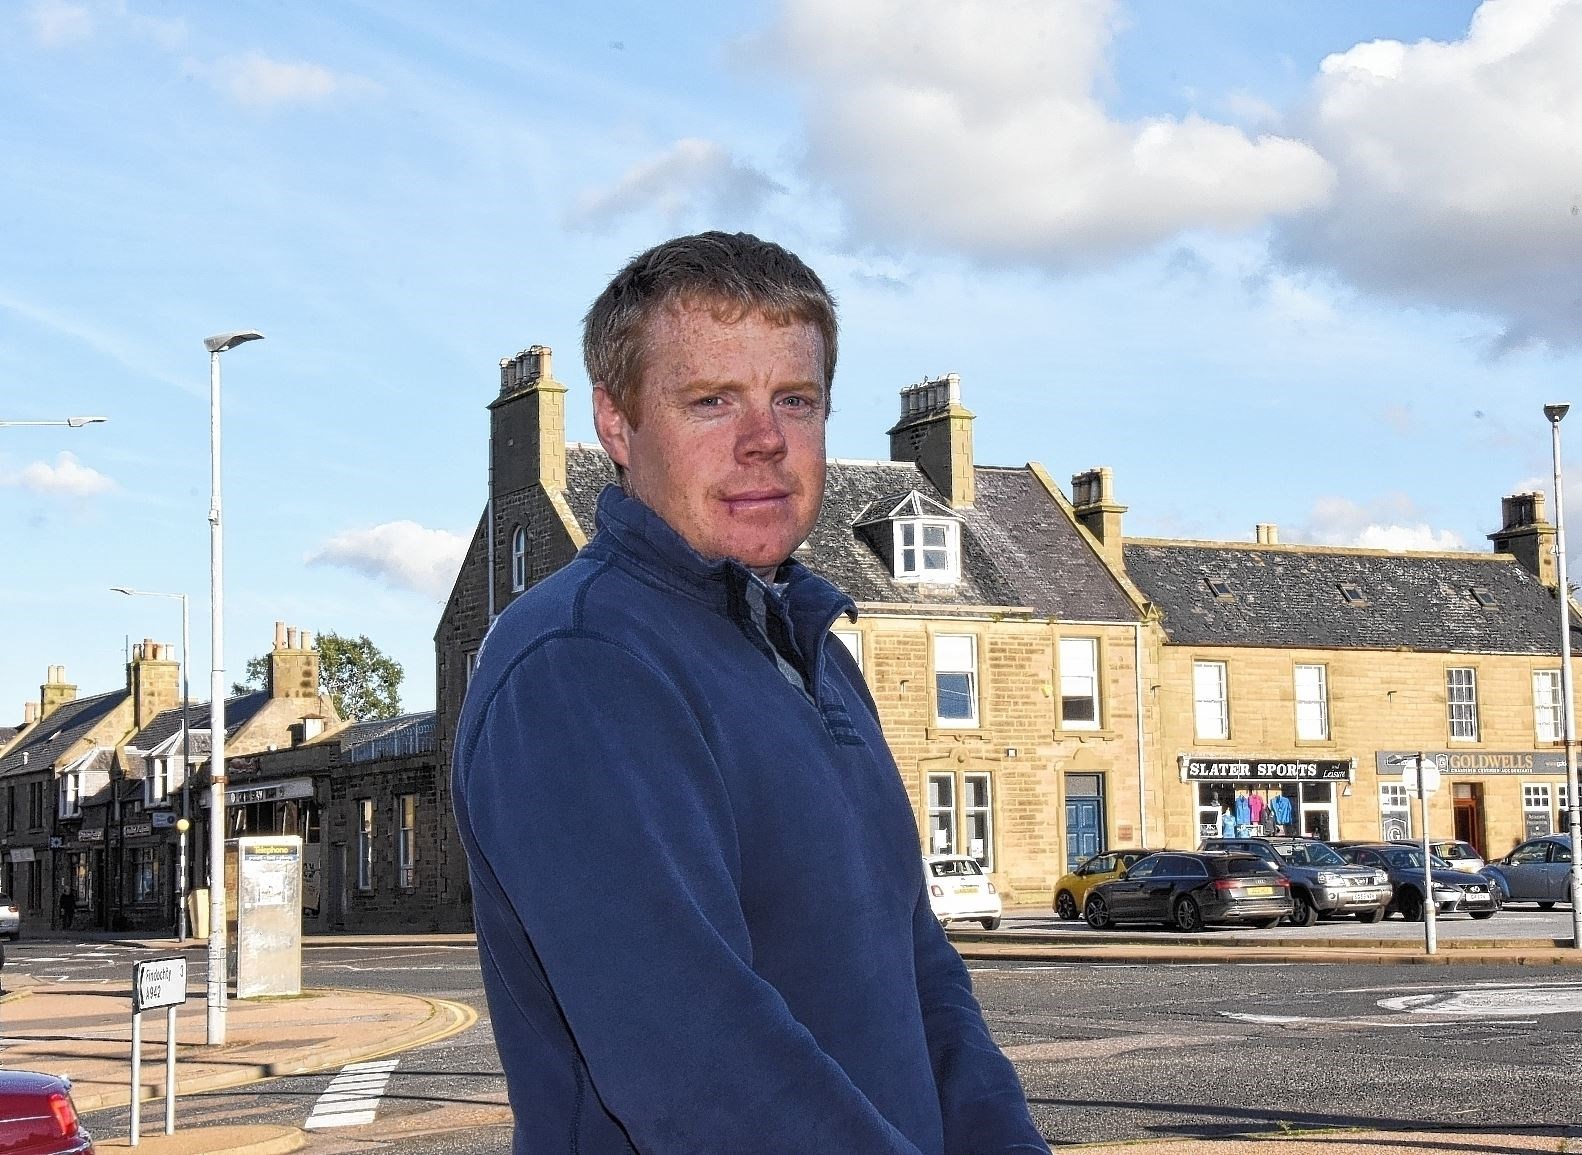 There are lots of good things happening in Buckie, says Councillor Tim Eagle.